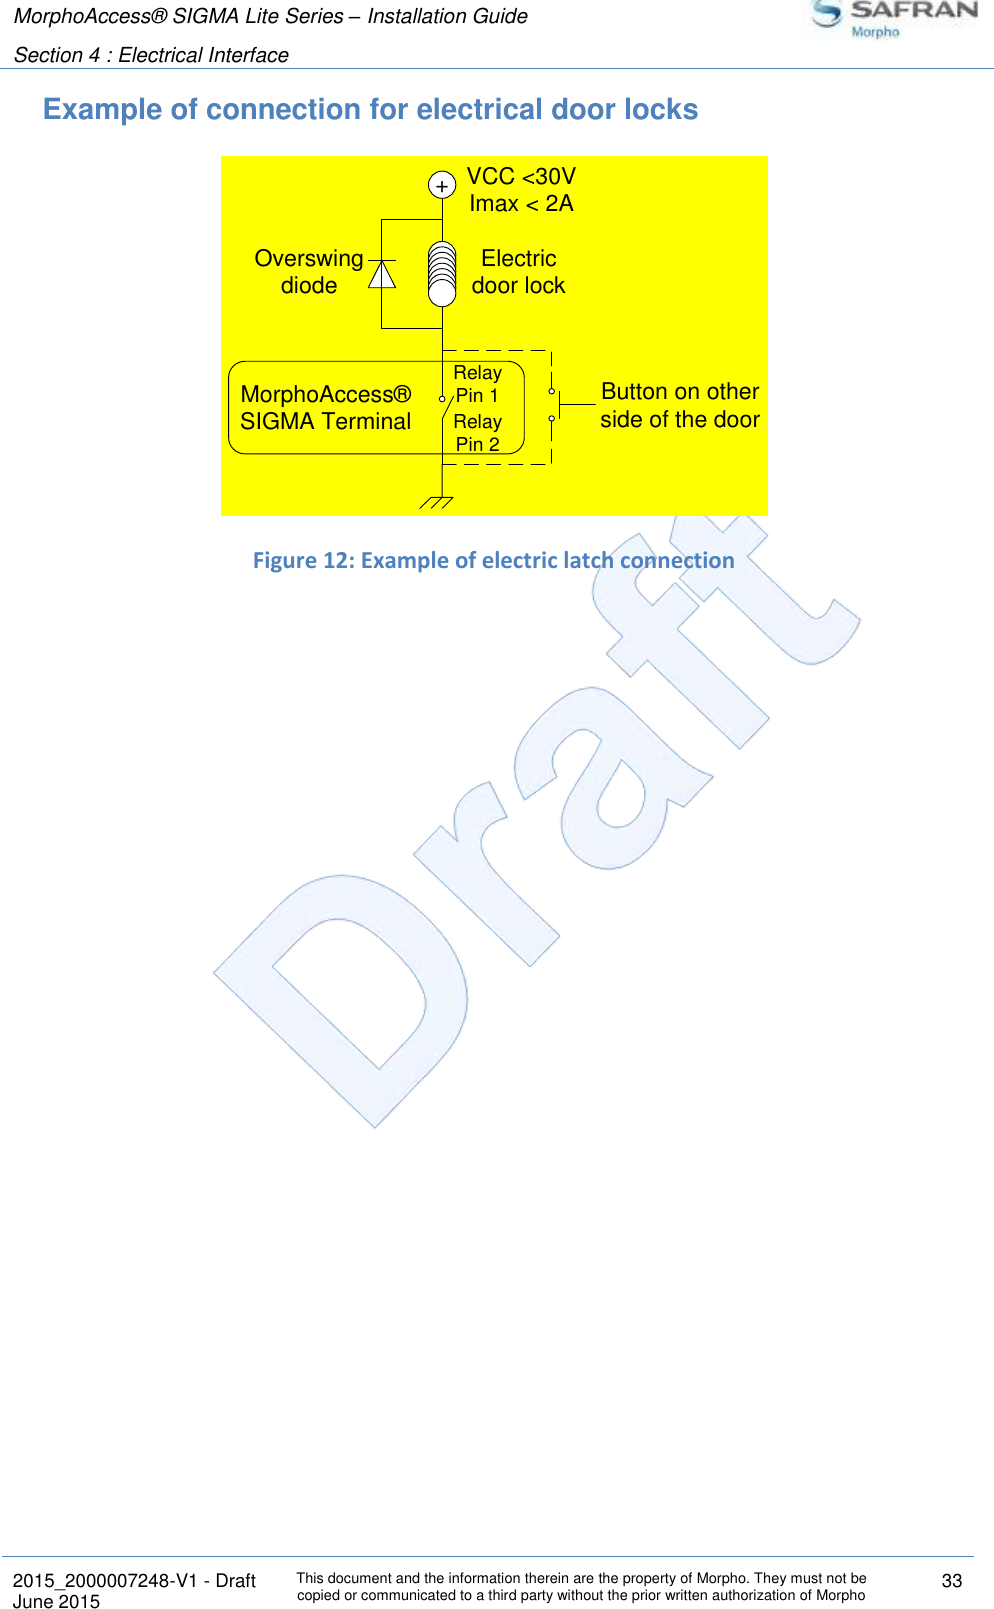 MorphoAccess® SIGMA Lite Series – Installation Guide  Section 4 : Electrical Interface   2015_2000007248-V1 - Draft This document and the information therein are the property of Morpho. They must not be copied or communicated to a third party without the prior written authorization of Morpho 33 June 2015   Example of connection for electrical door locks  Figure 12: Example of electric latch connection +VCC &lt;30VImax &lt; 2AElectricdoor lockOverswingdiodeMorphoAccess® SIGMA TerminalButton on otherside of the doorRelay Pin 1Relay Pin 2